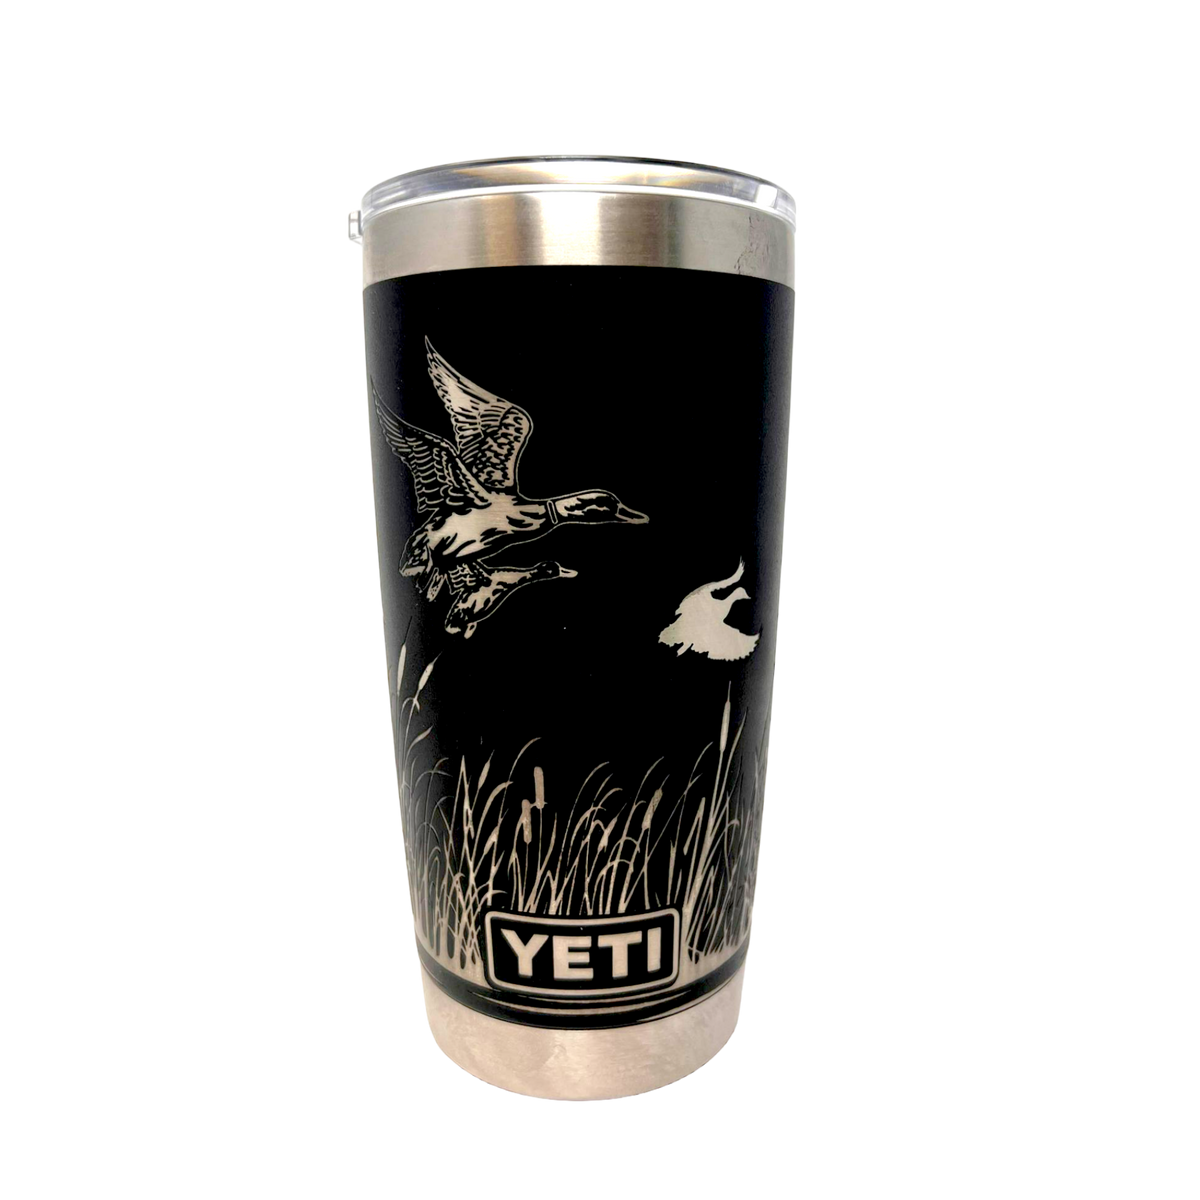 https://cdn.shopify.com/s/files/1/0606/5497/7184/products/wind-river-outpost-duck-hunting-yeti-front_1200x.png?v=1679171654